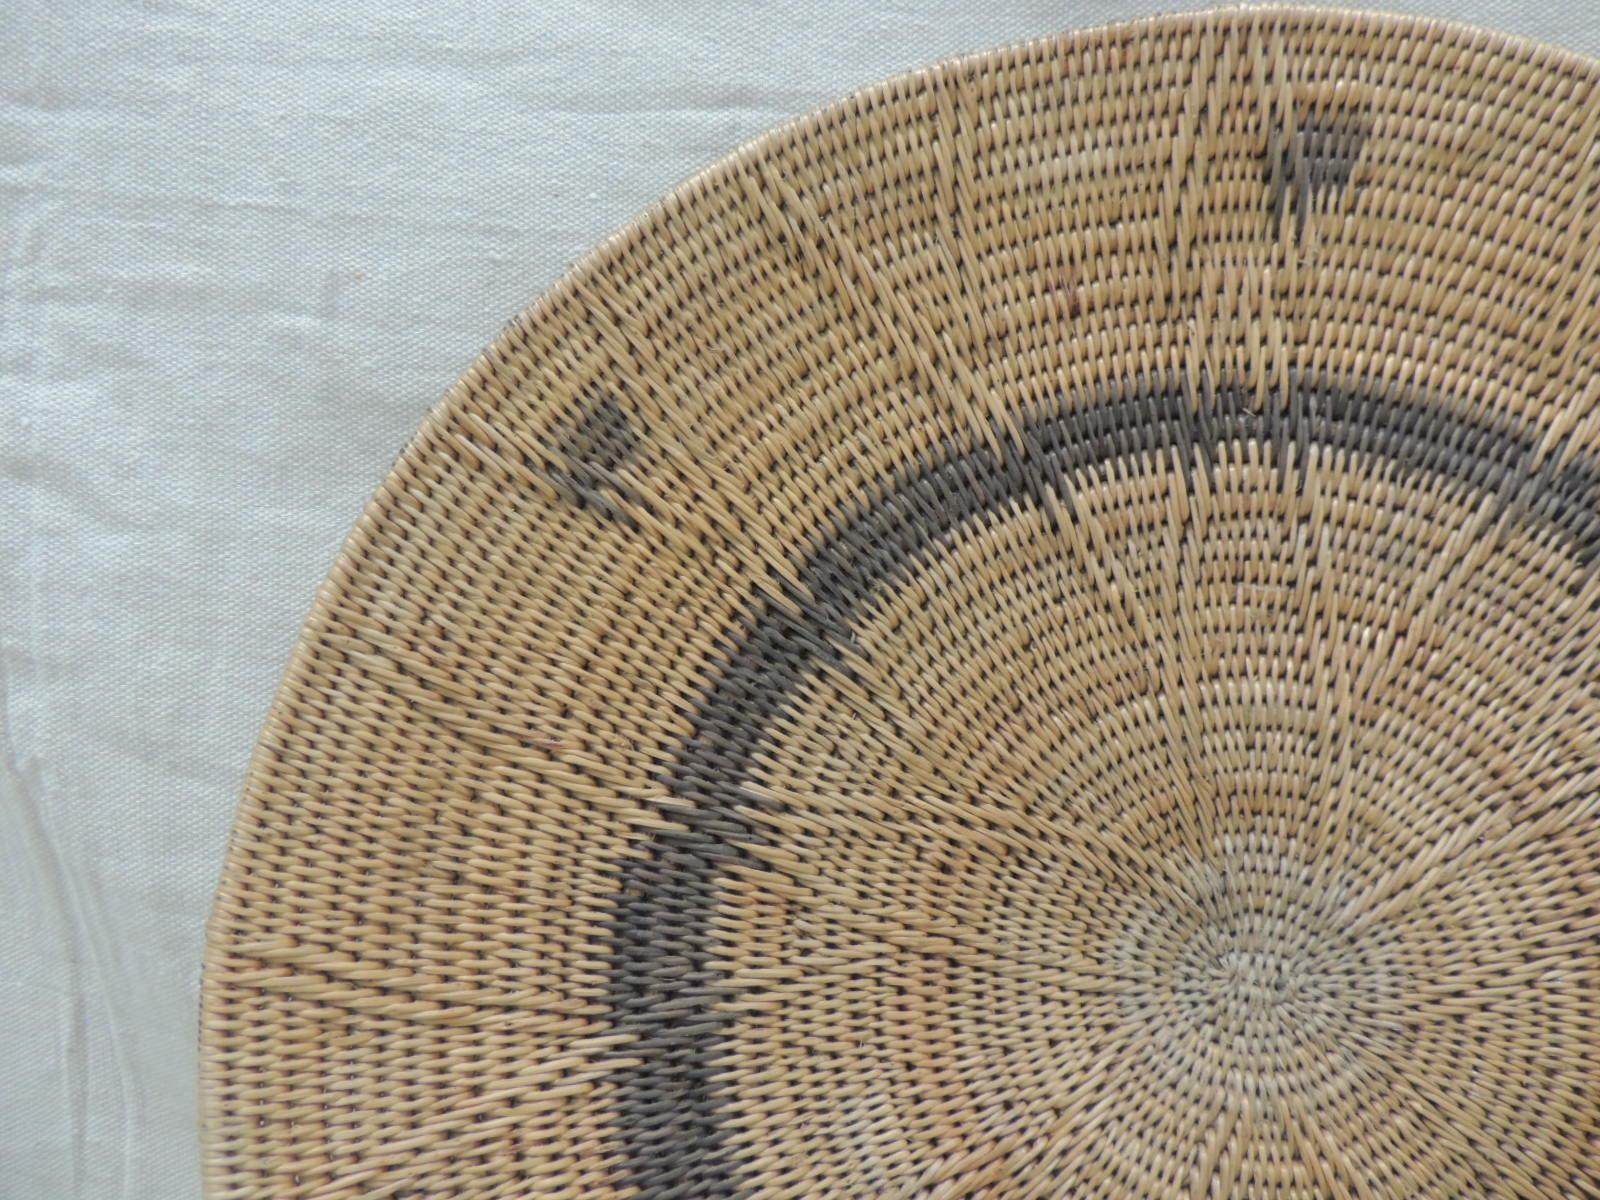 Large vintage woven seagrass ethnic round African deep basket.
Artisanal handwoven basket with tribal designs and patterns all around.
(Is not flat is more like a deep bowl shape, double woven technique.)
Size: 18.25” D x 2” H.



